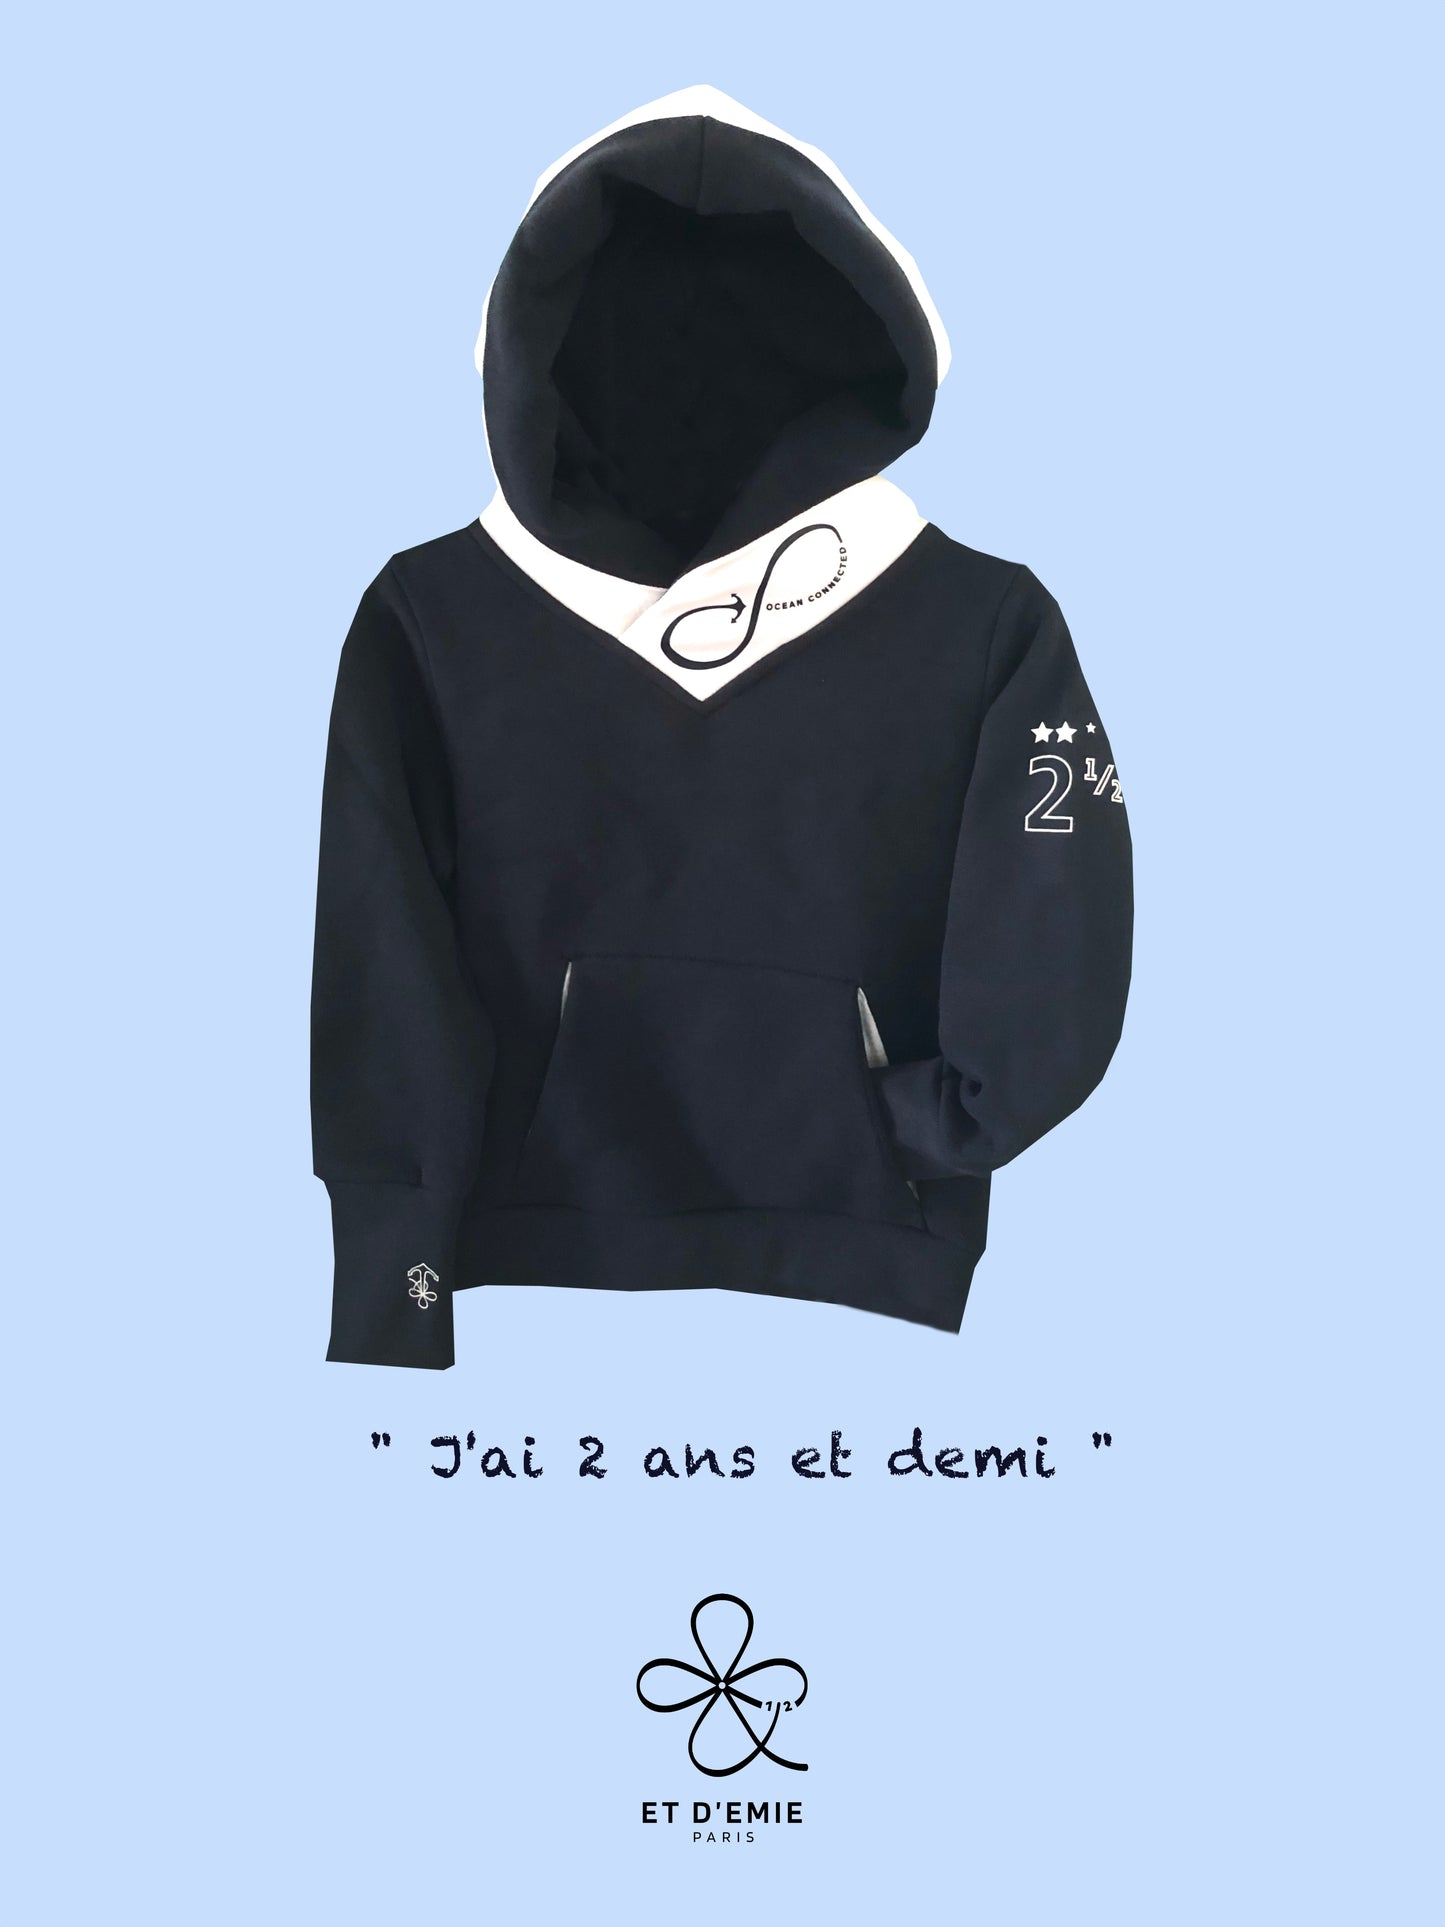 Hoody OCEAN CONNECTED "I'm 2 and a half years old" in navy organic cotton and white seaqual 🇫🇷